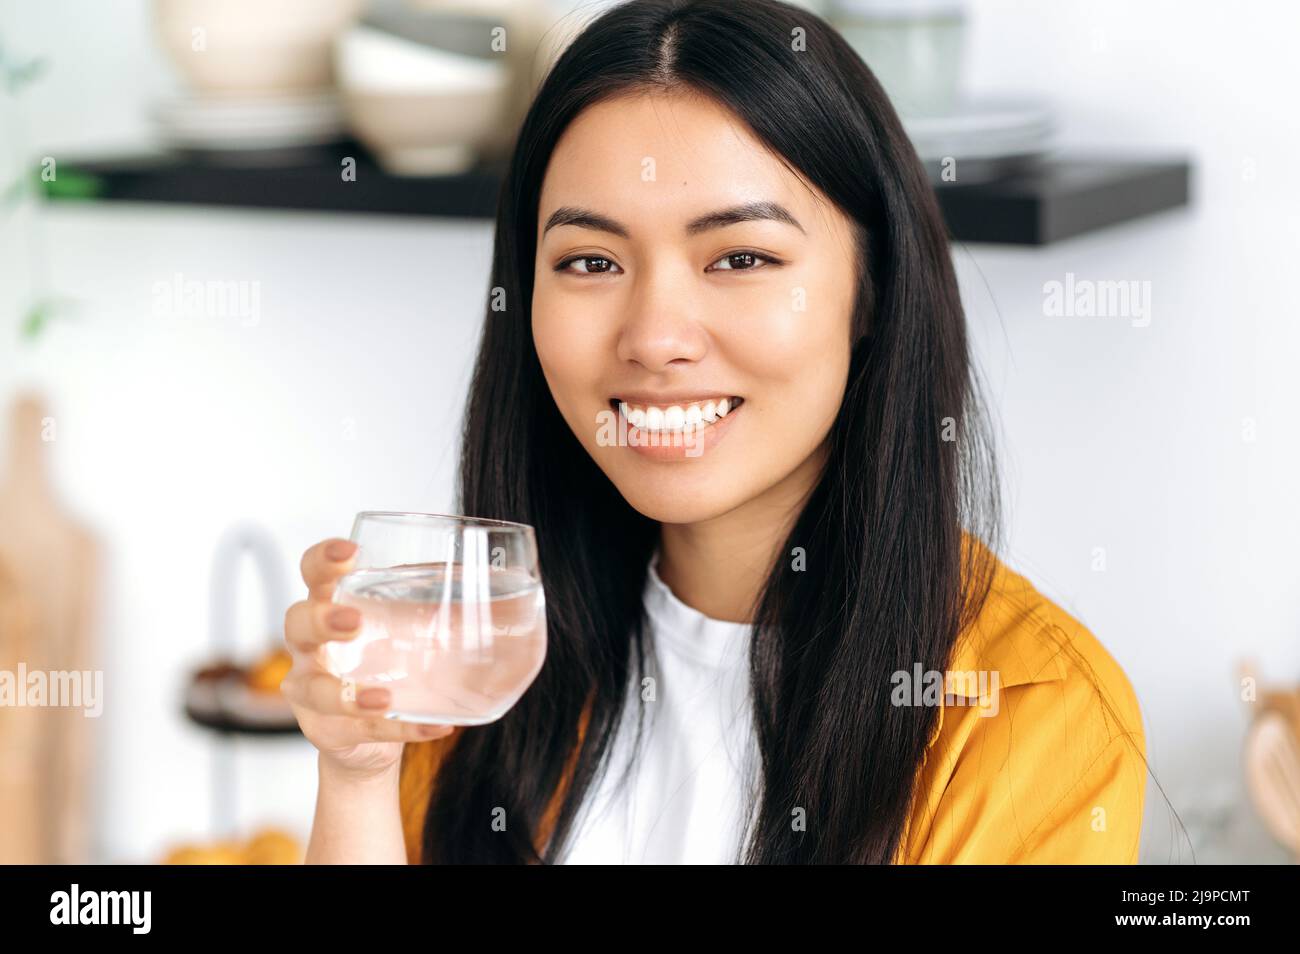 https://c8.alamy.com/comp/2J9PCMT/pretty-healthy-chinese-brunette-girl-dressed-in-casual-stylish-clothes-holds-a-glass-of-pure-water-takes-care-of-her-health-drinks-daily-norm-of-water-looking-at-camera-smiles-friendly-2J9PCMT.jpg